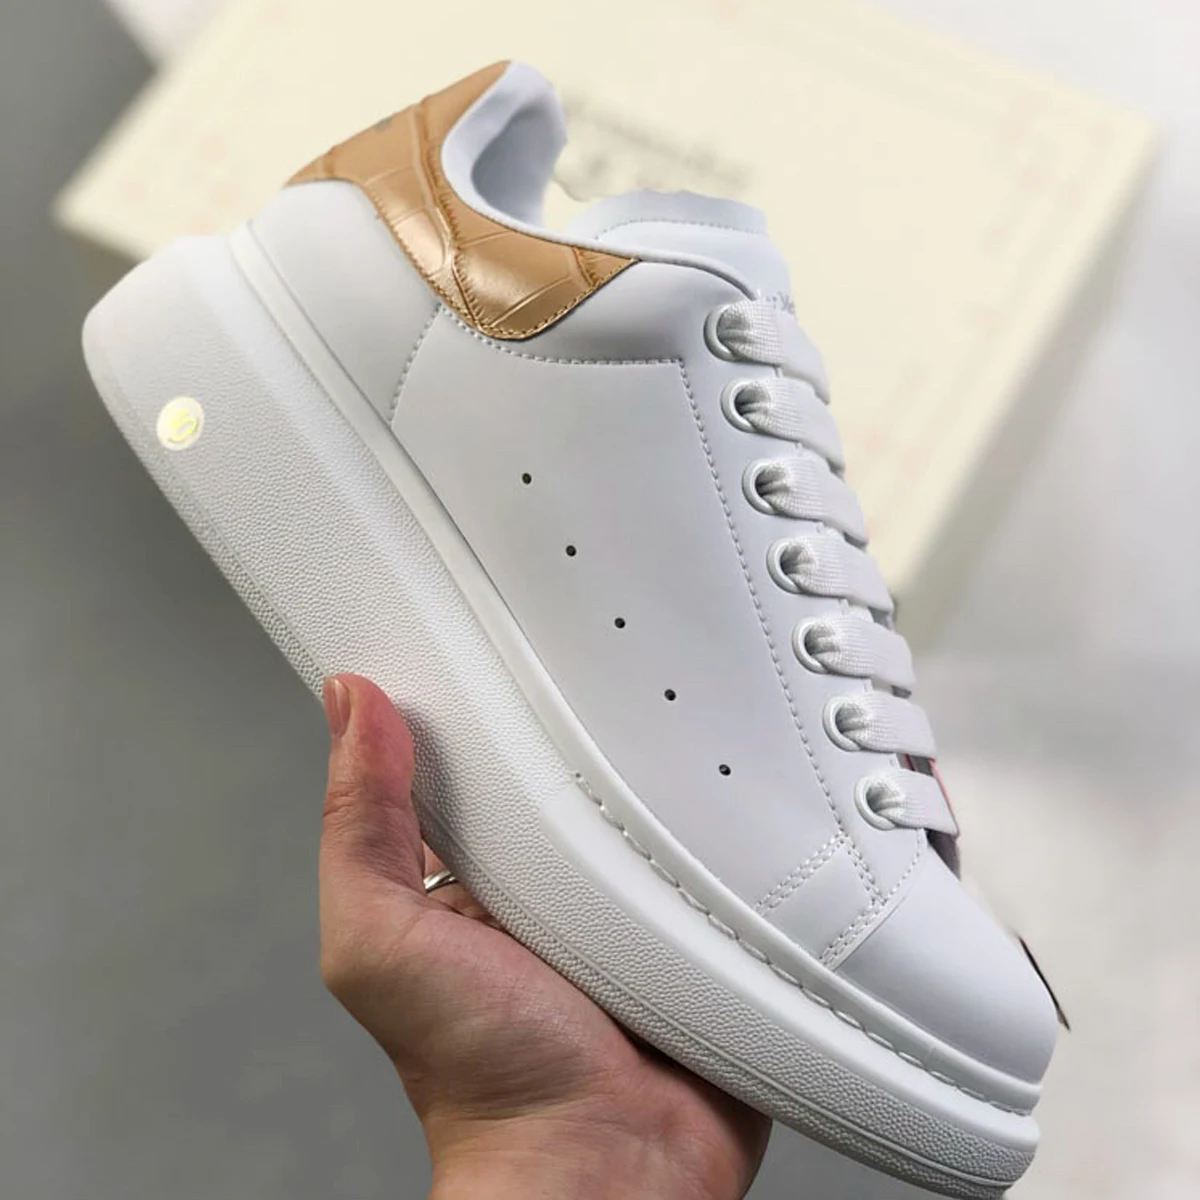 

2023 New Mcqueen Sneakers Women Men Lace Up Fashion Designer Luxury Original Brand Leather Shoes Alexander Casual Sports Shoes